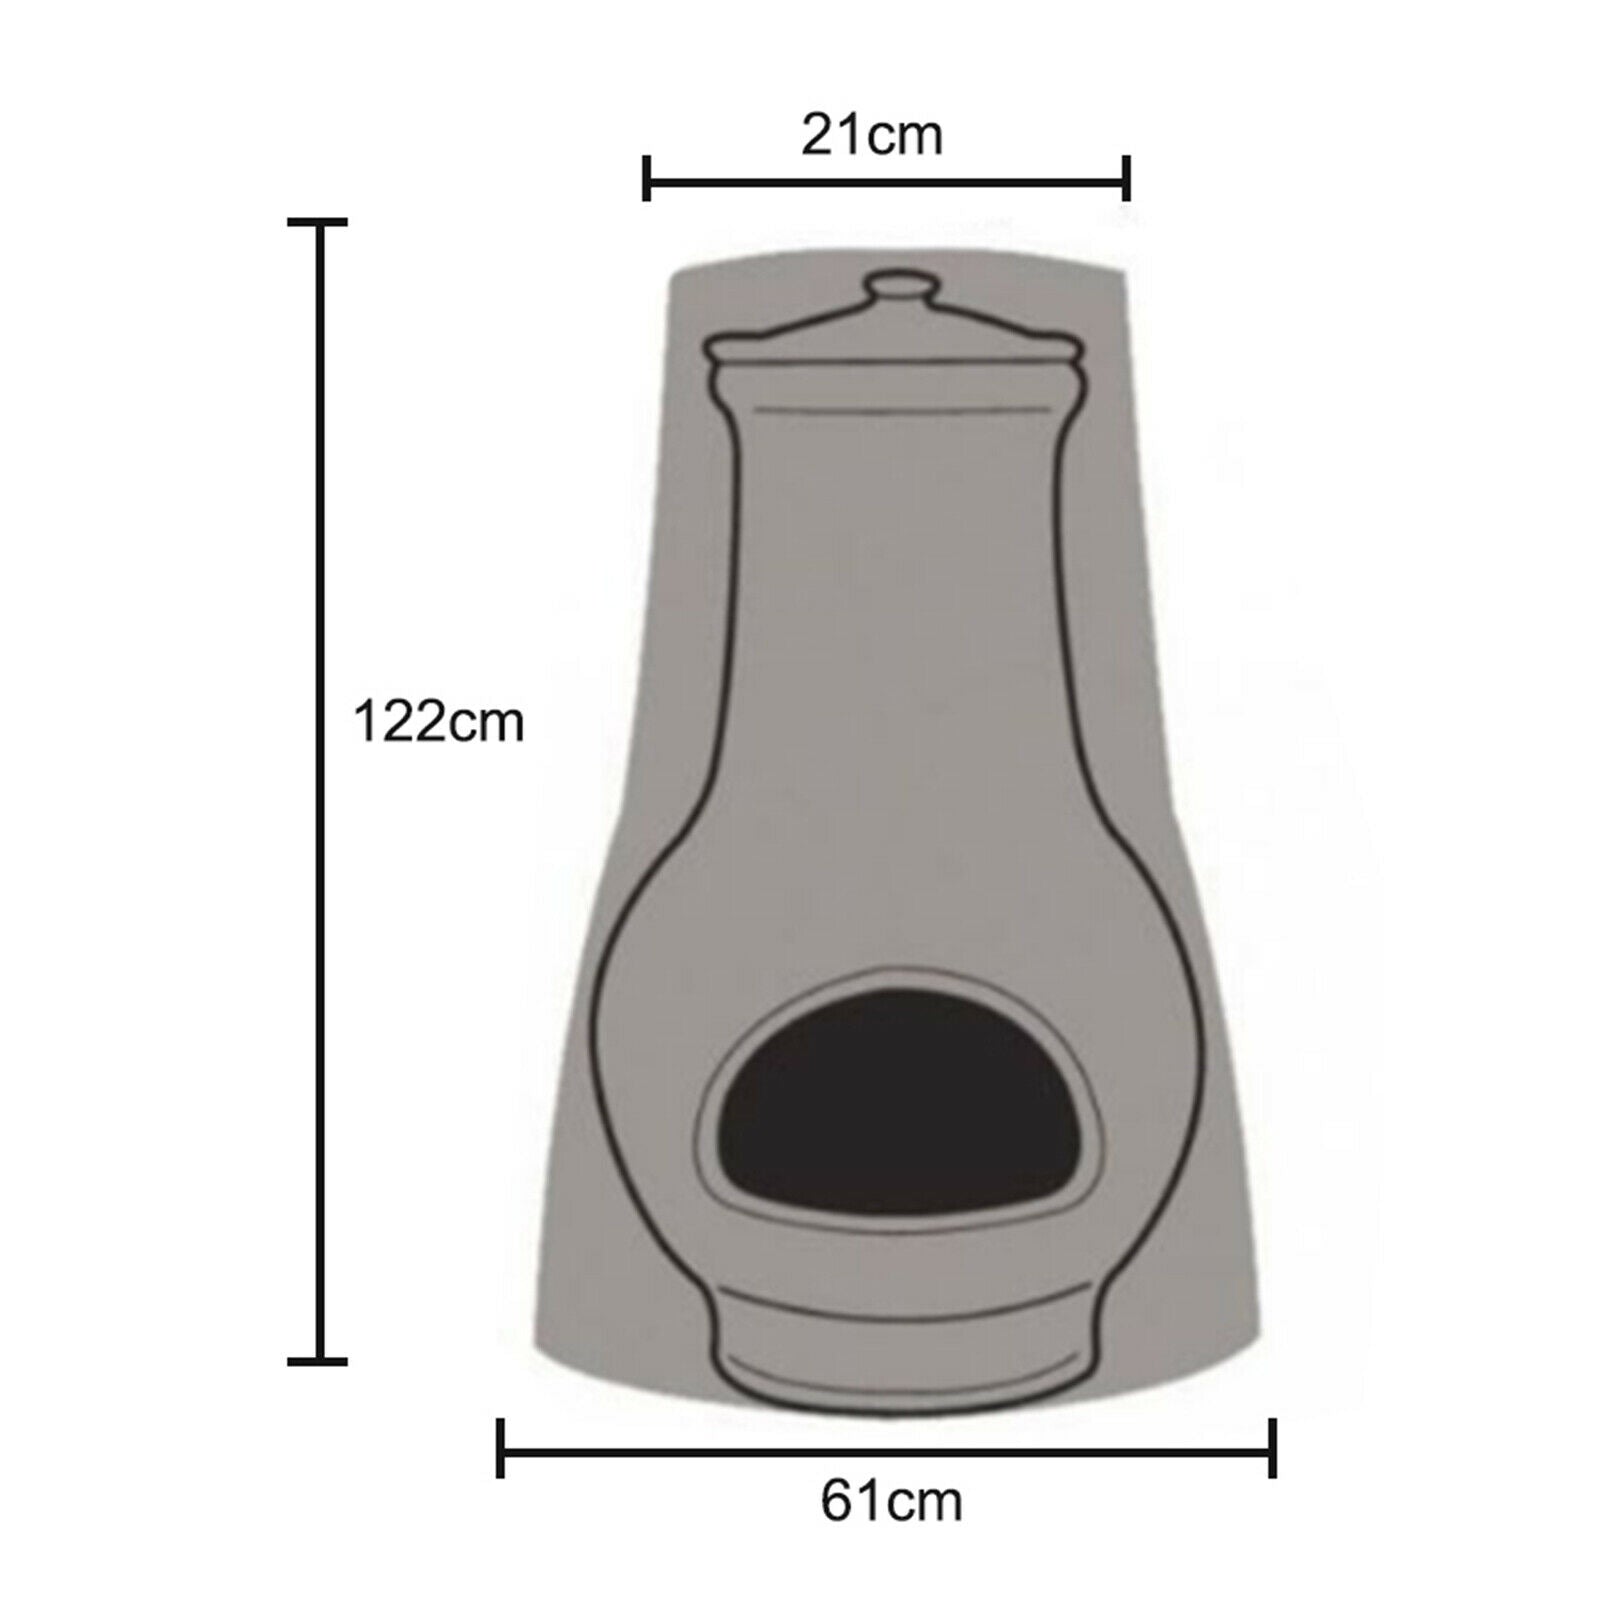 Polyester Chiminea Fire Pit Protective Cover Dust Protection BBQ - Green